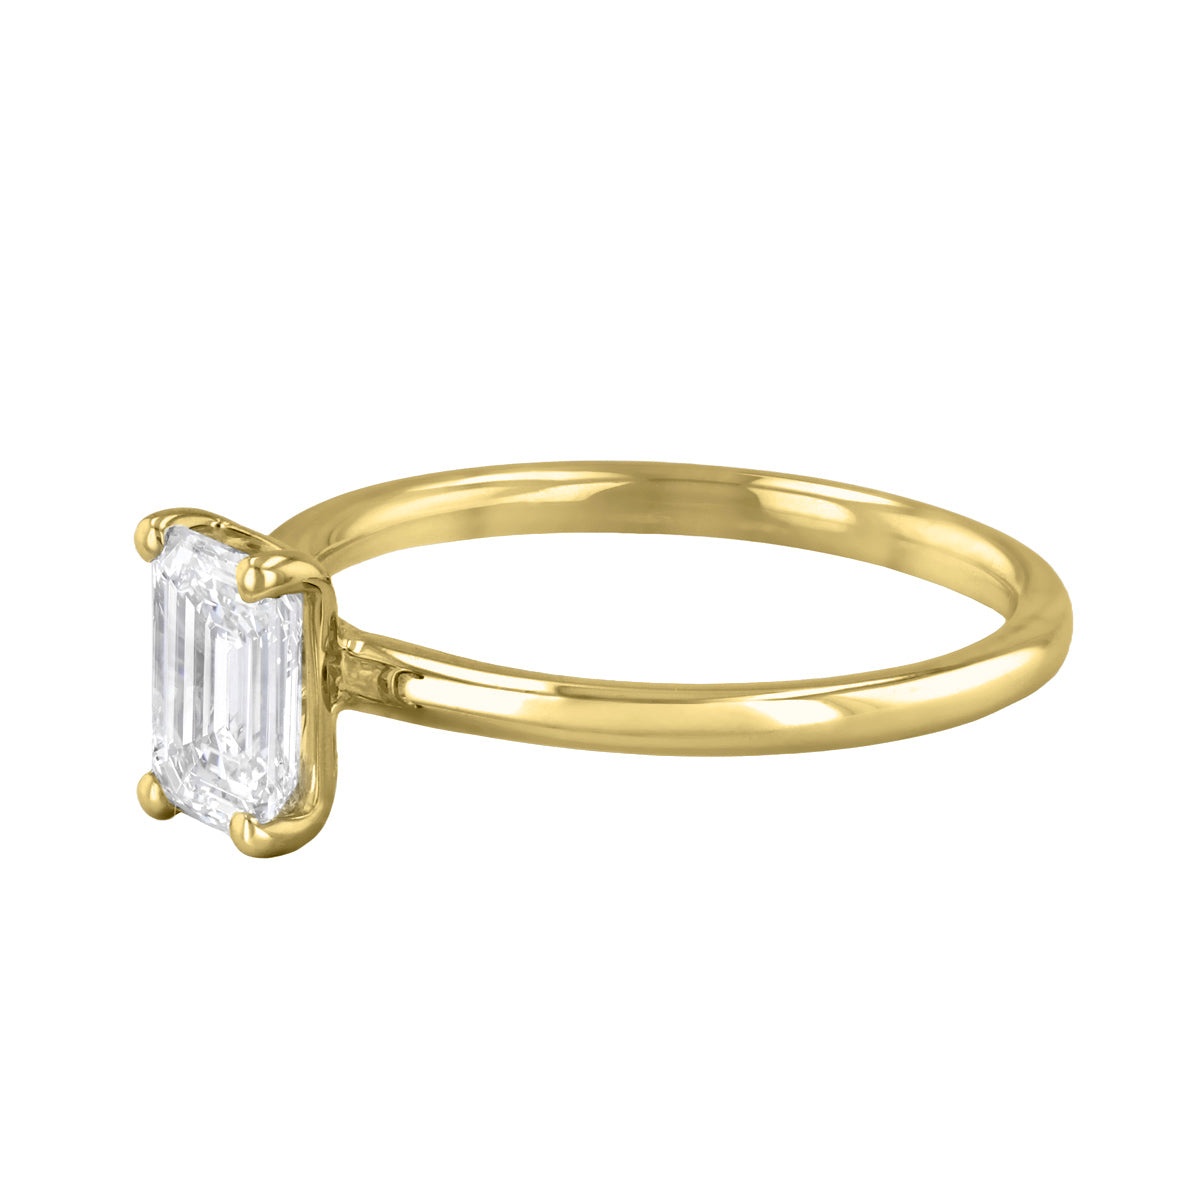 0-35ct-sofia-emerald-cut-solitaire-diamond-engagement-ring-18ct-yellow-gold